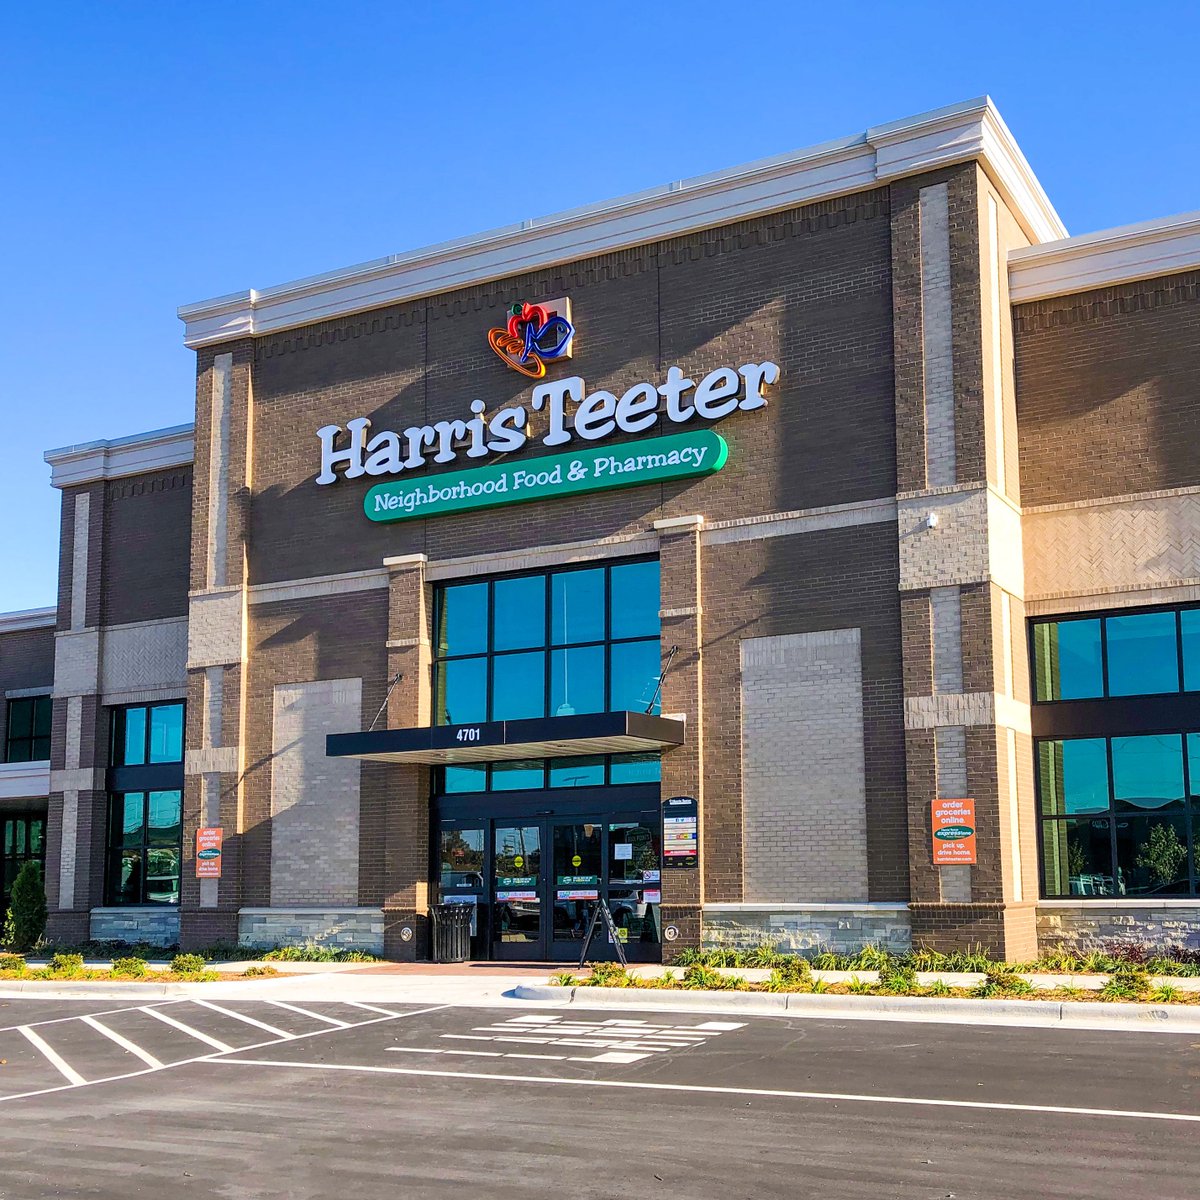 The @HarrisTeeter at Riverbend Village in Mountain Island held opened today! The new store is 78,000 SF... it's kind of a big dill 😉

#landlordrep #grandopening #harristeeter #riverbendvillage #myharristeeter #mountainisland